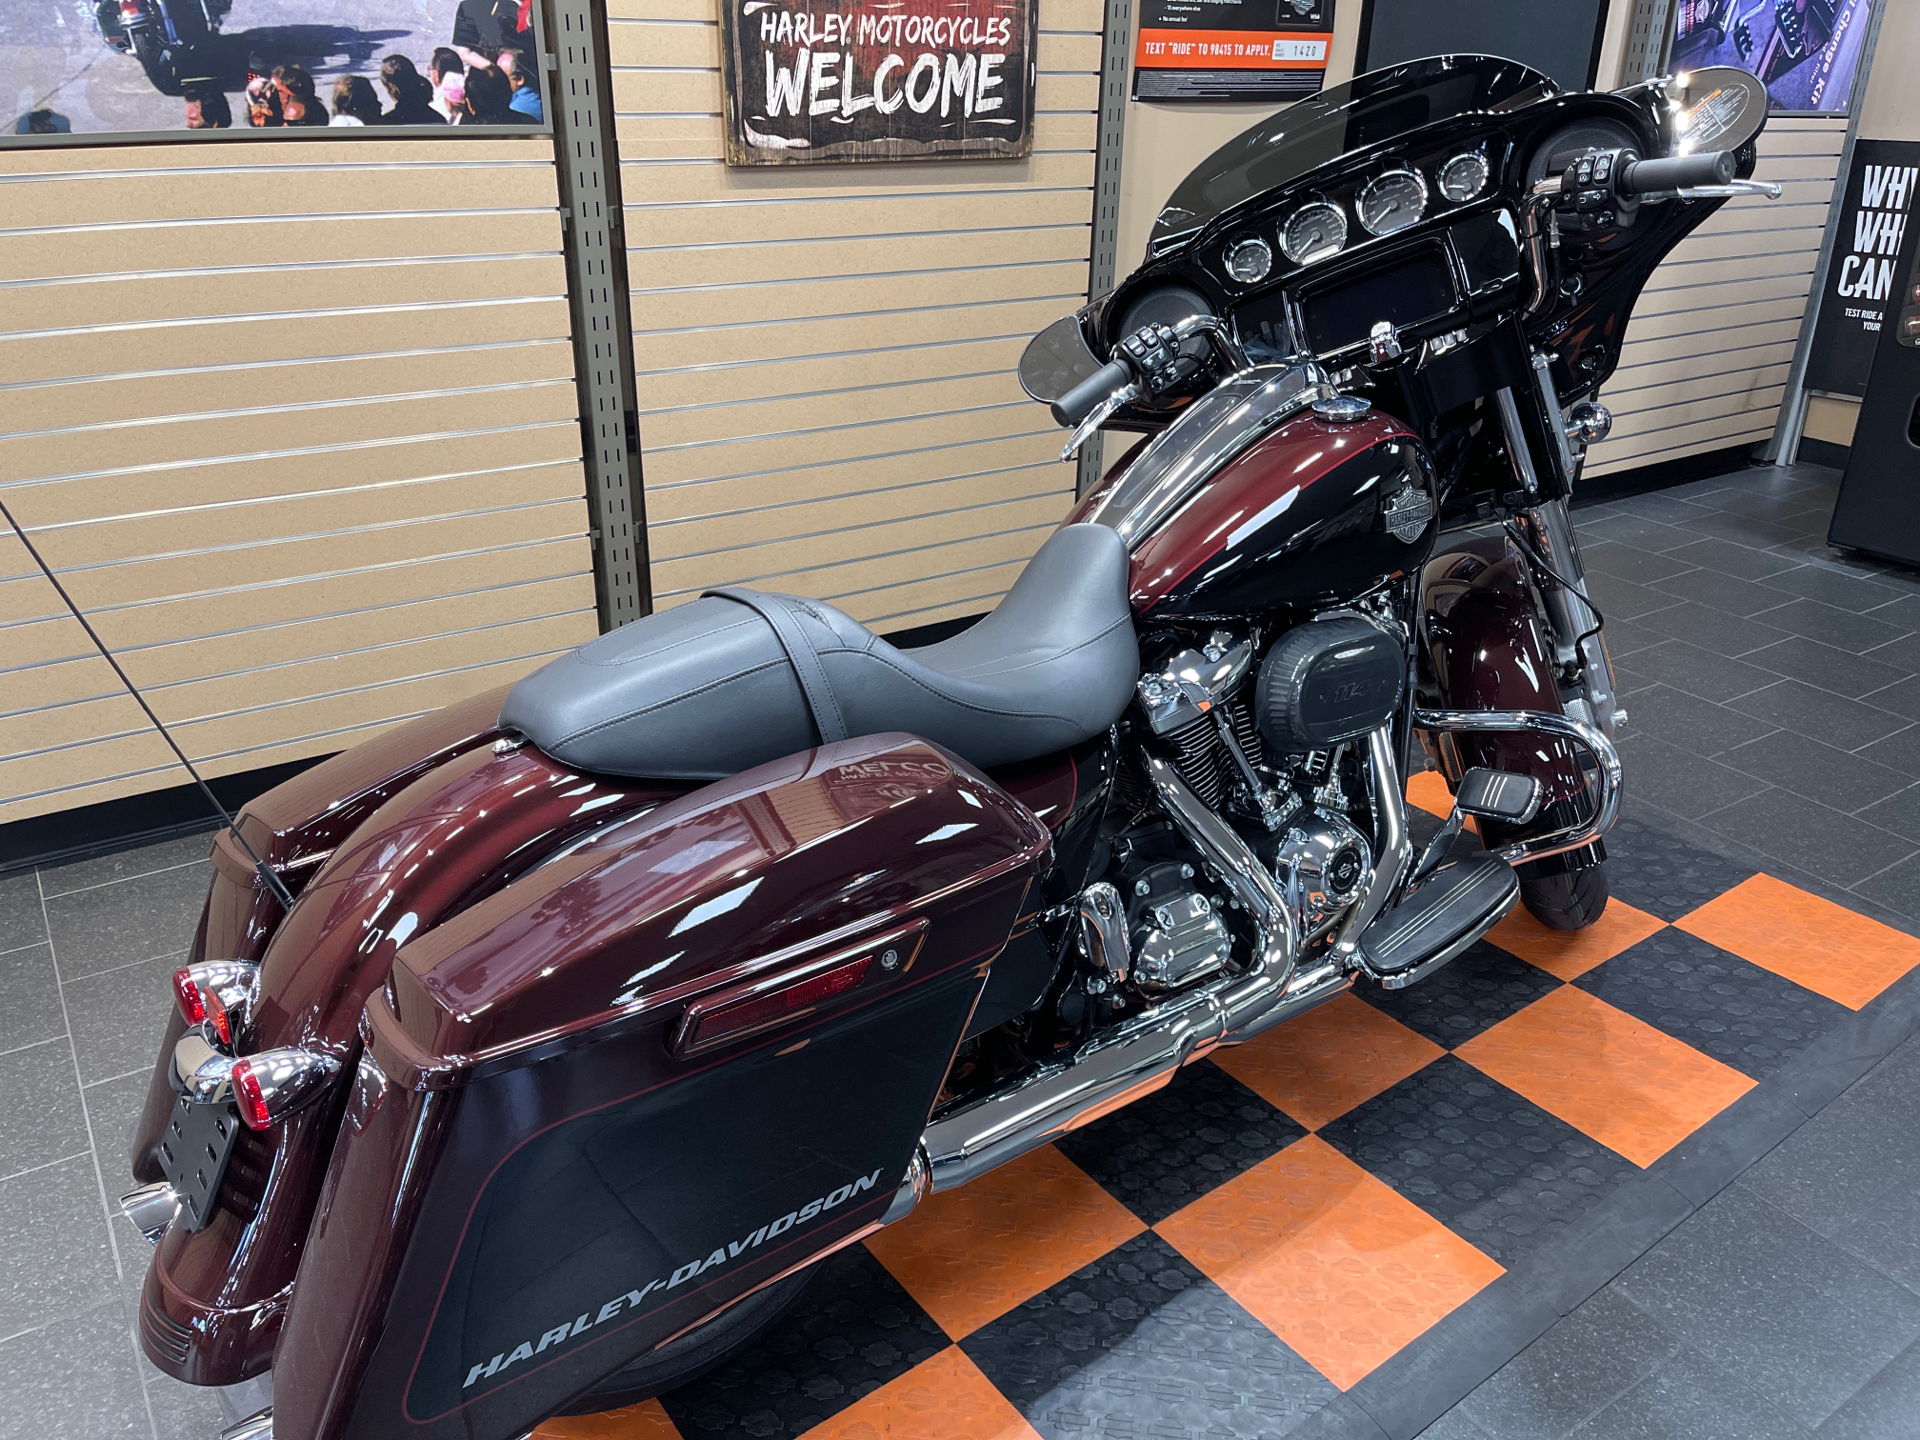 2022 Harley-Davidson Street Glide® Special in The Woodlands, Texas - Photo 6